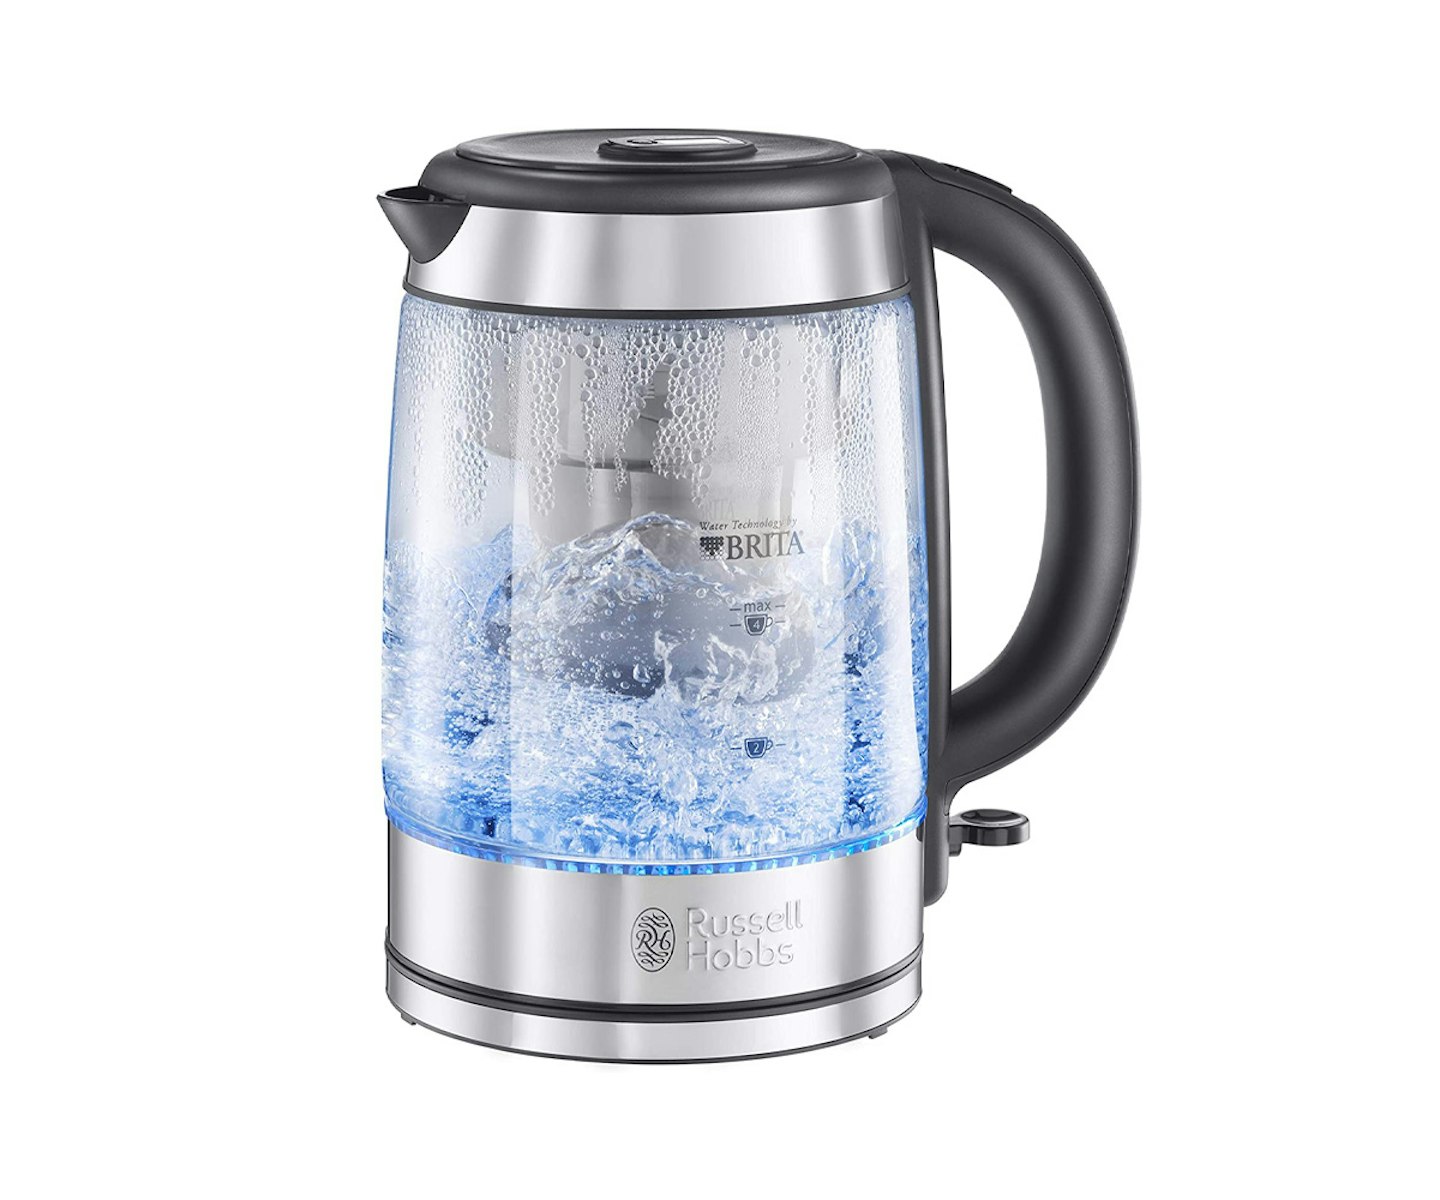 Stellar glass filter kettle review - Review